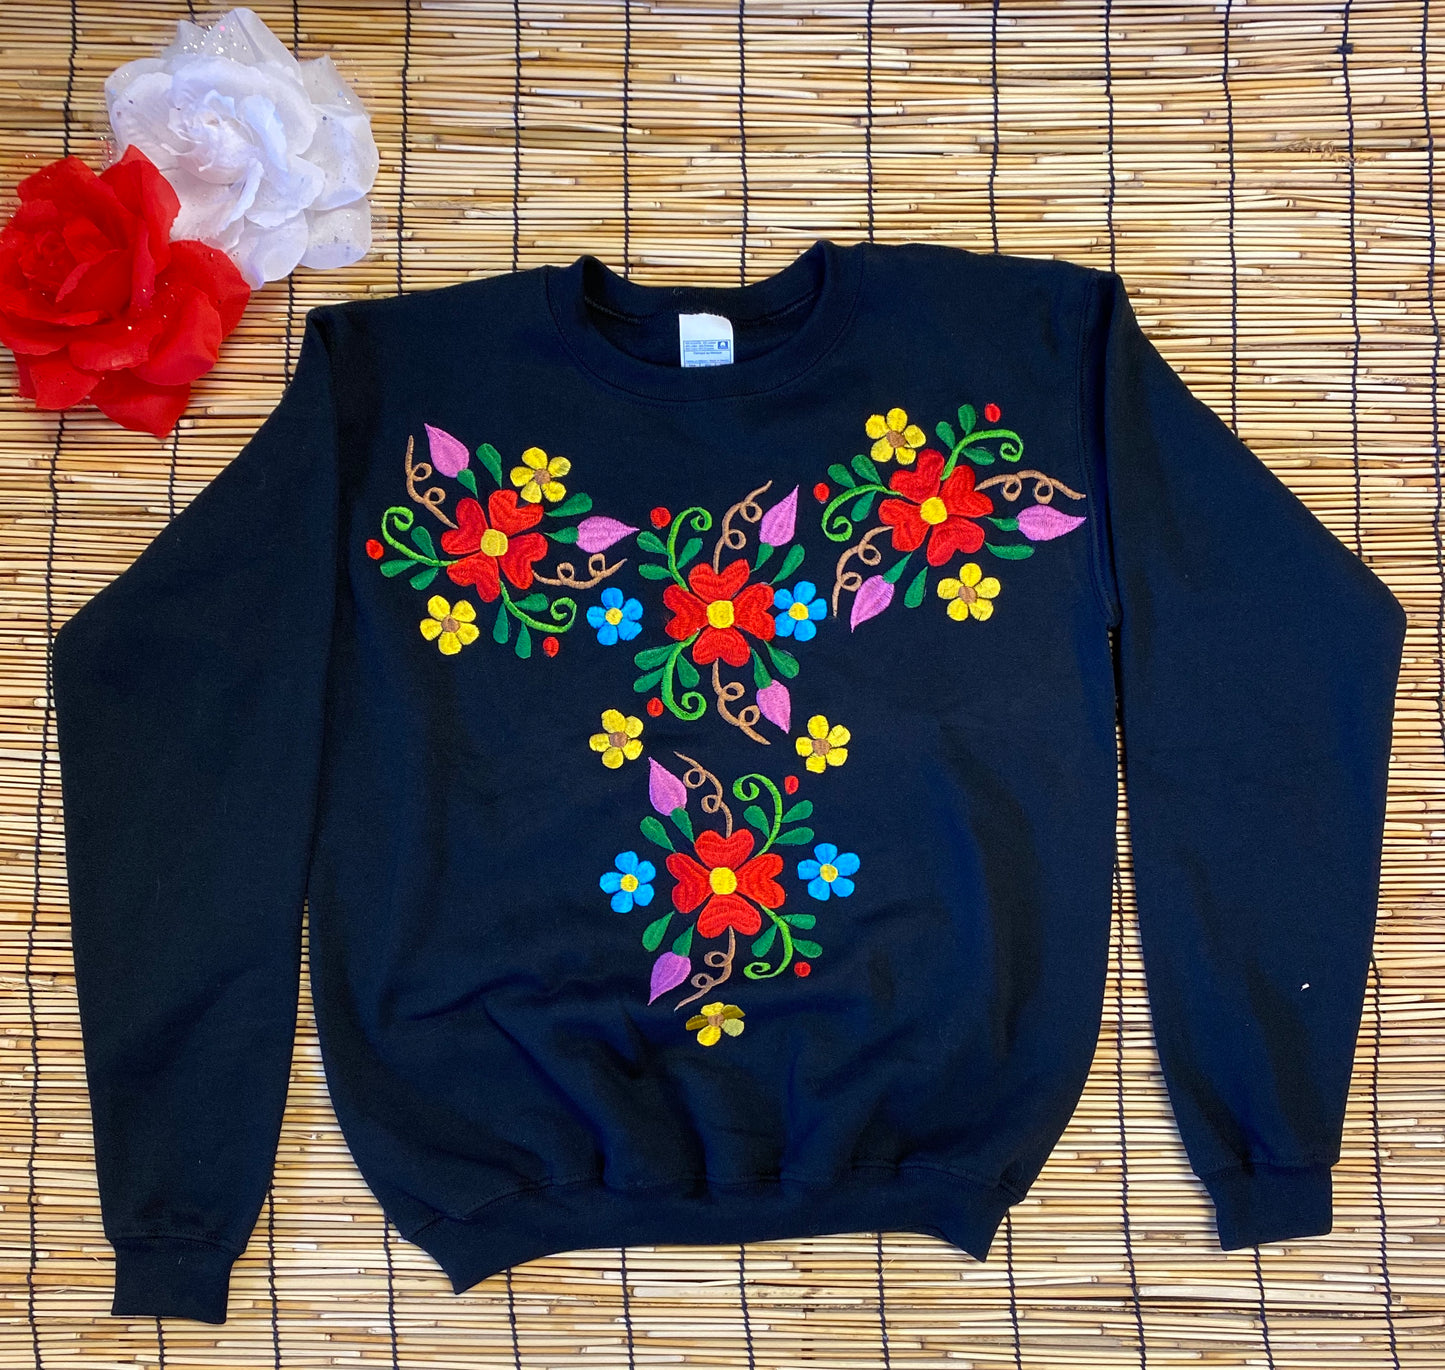 Floral Black Sweater sold out